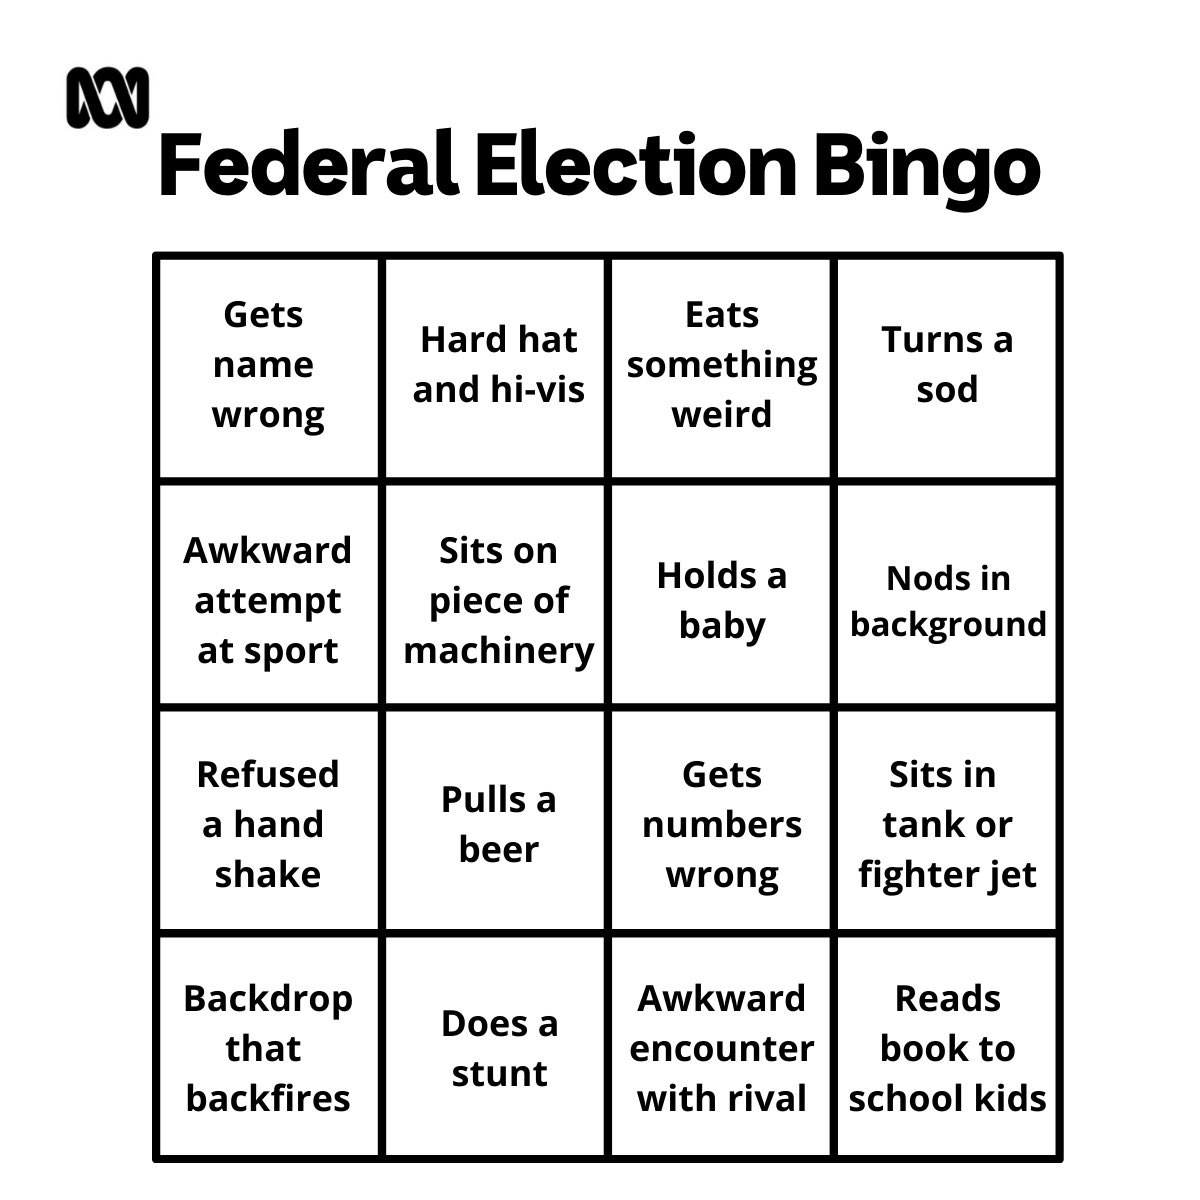 Join us for our federal election bingo! How many can you tick off? Let’s see if Australia’s leaders can complete them all before the May 21 vote #auspol @nikolaibeilharz @abcadelaide